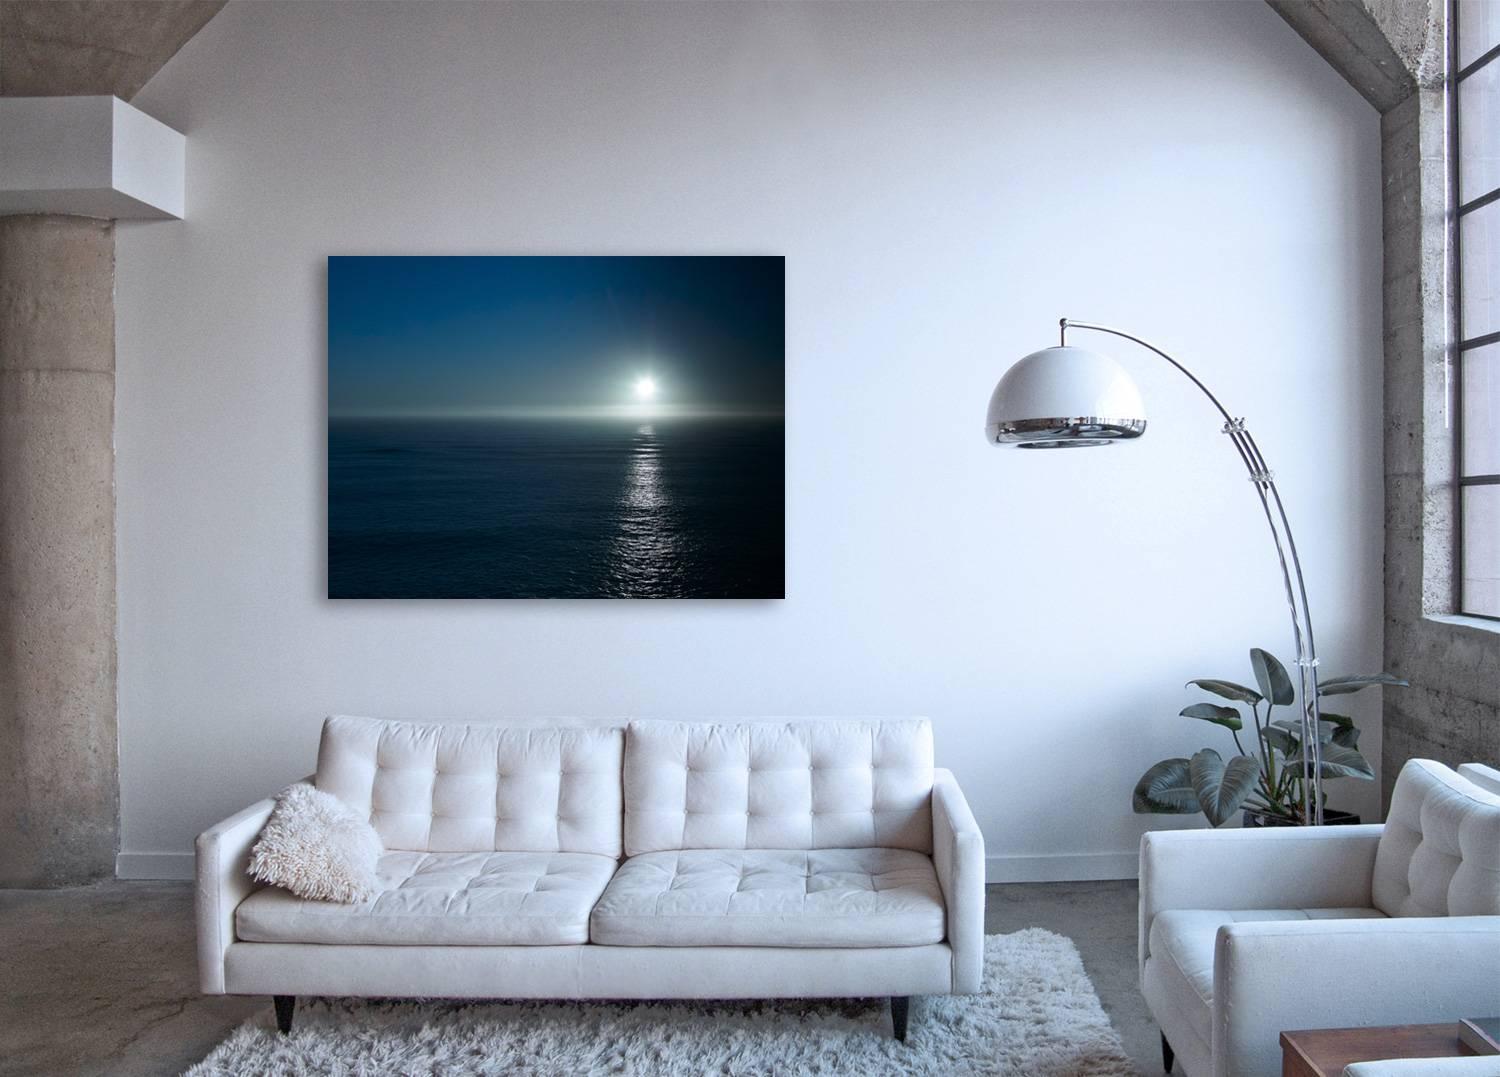 Seascape III - large format photograph of monochromatic blue horizon and sea - Photograph by Frank Schott